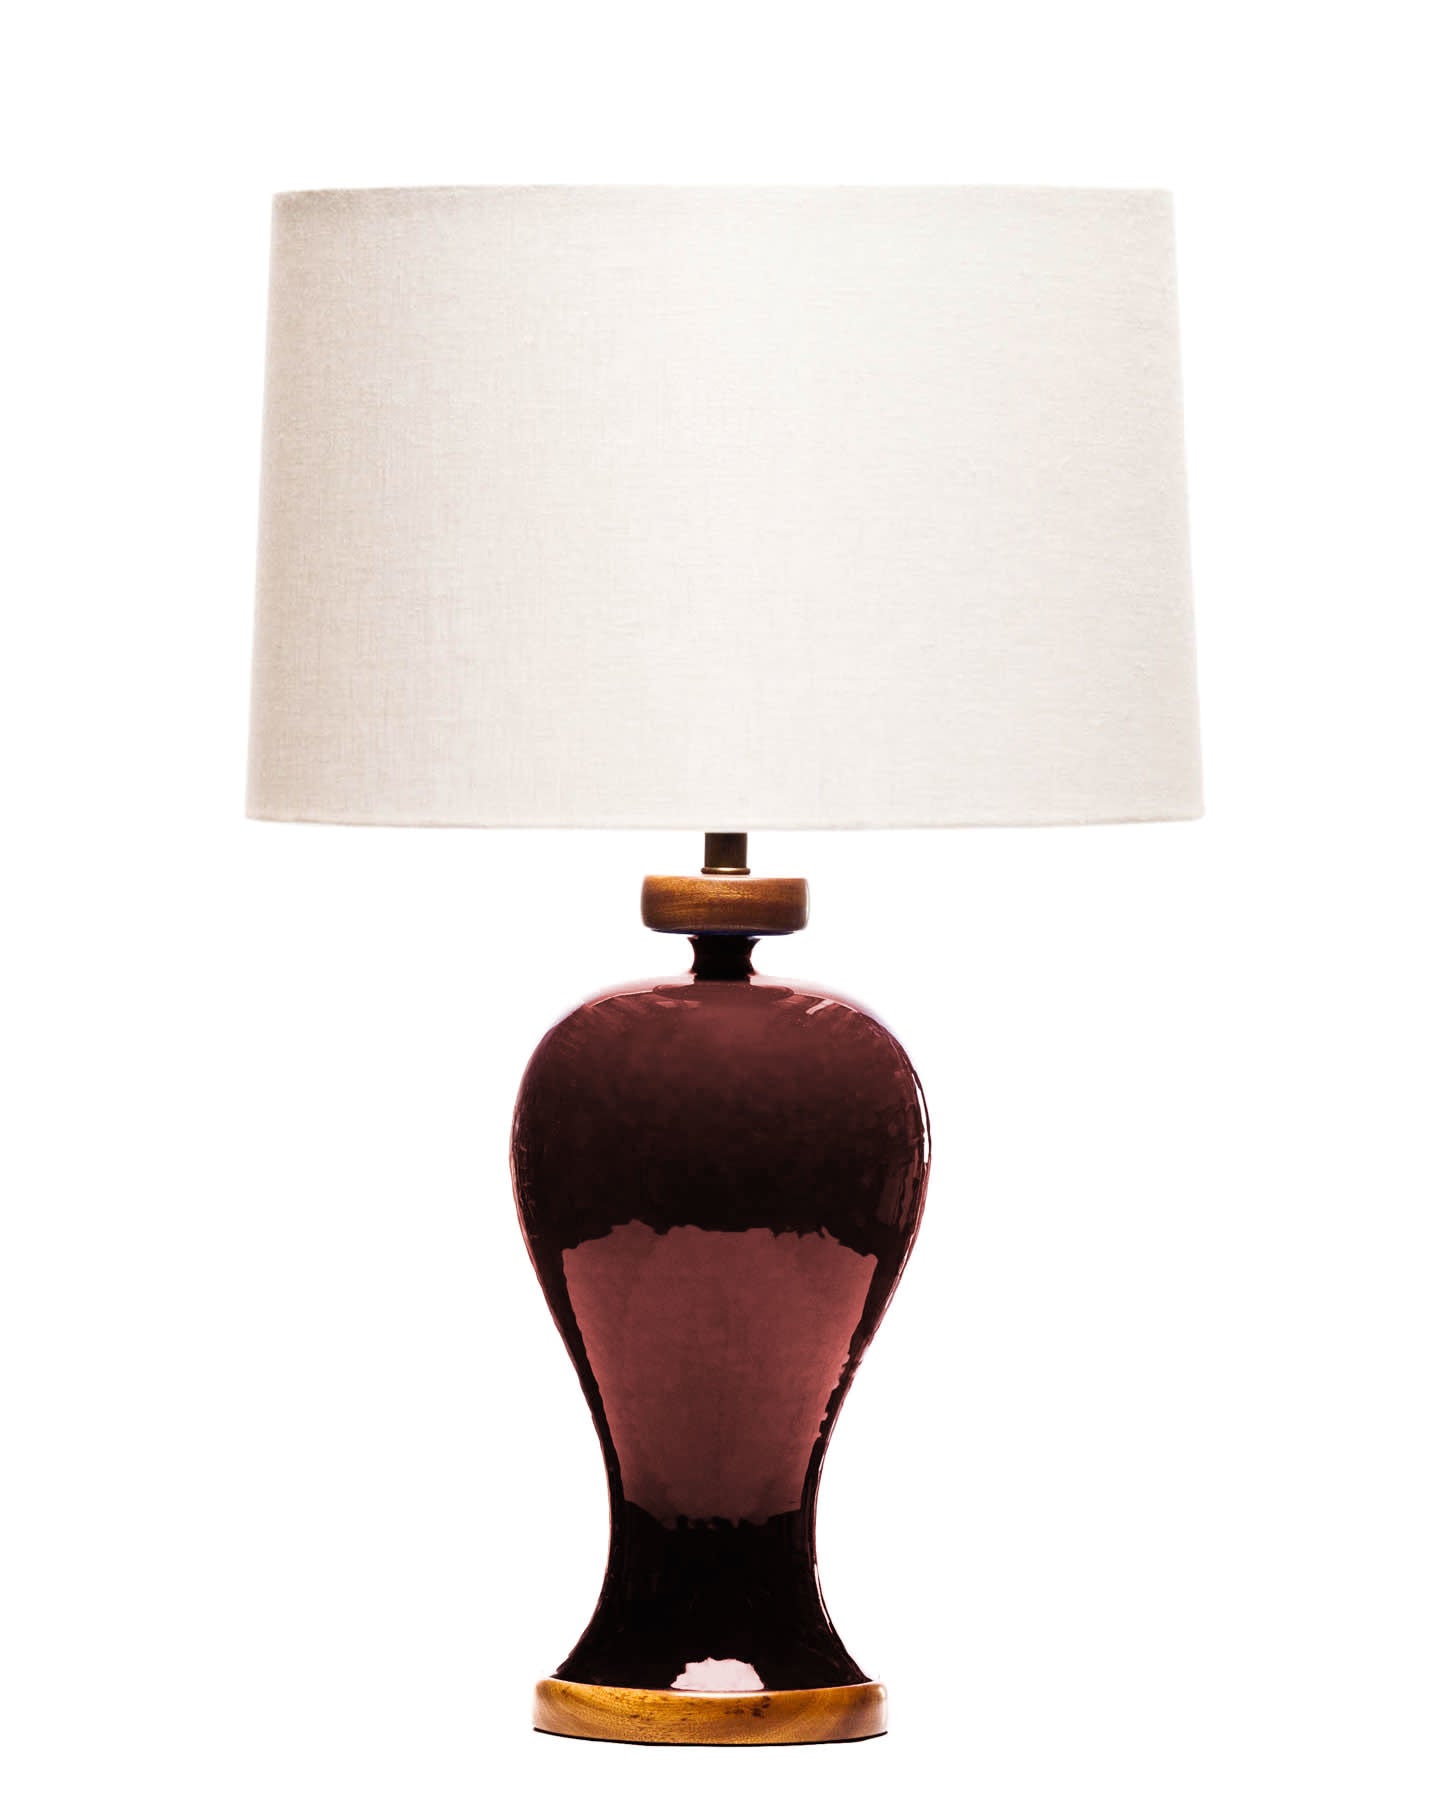 Lawrence & Scott Anita Porcelain Table Lamp in Pinot Red